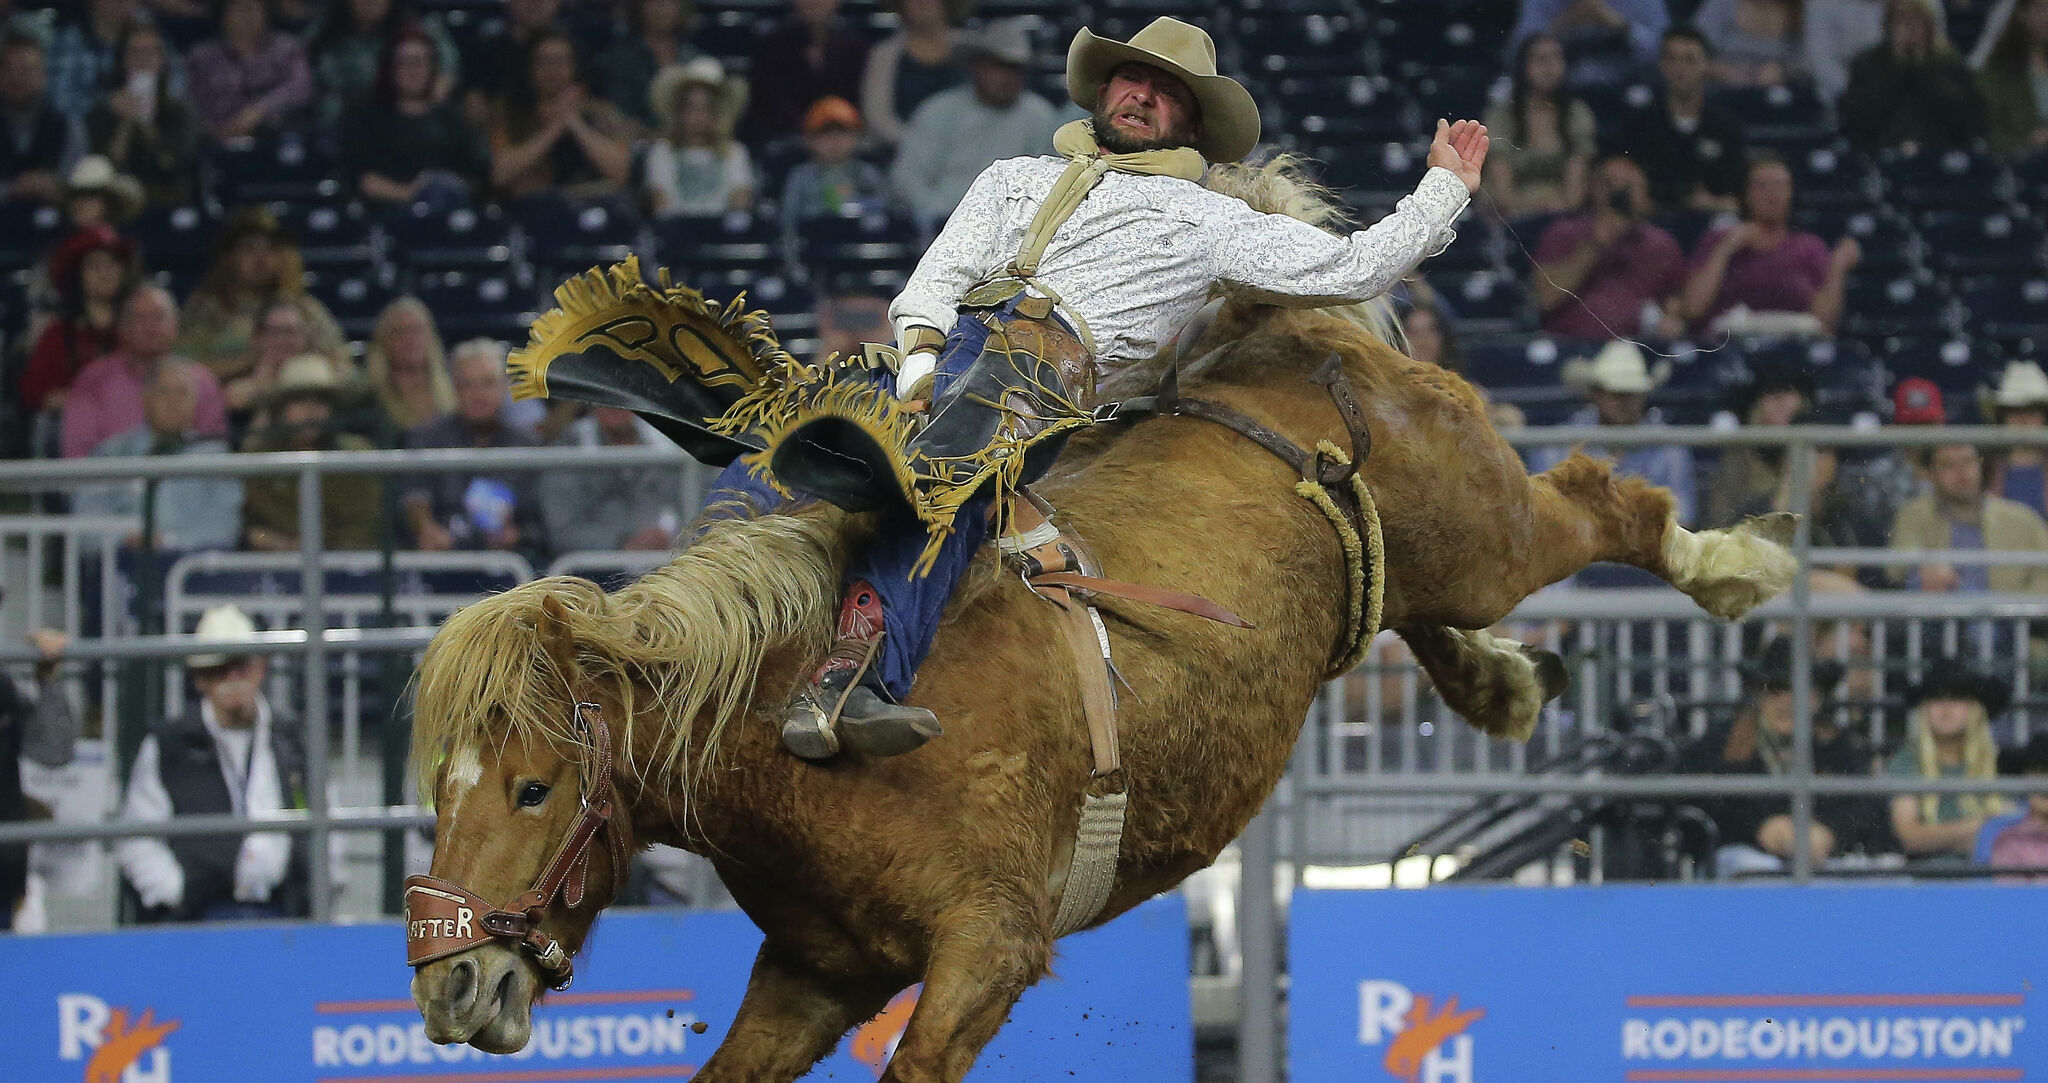 Bareback rider Will Lowe puts on a show in Semifinal 2 at RodeoHouston picture image